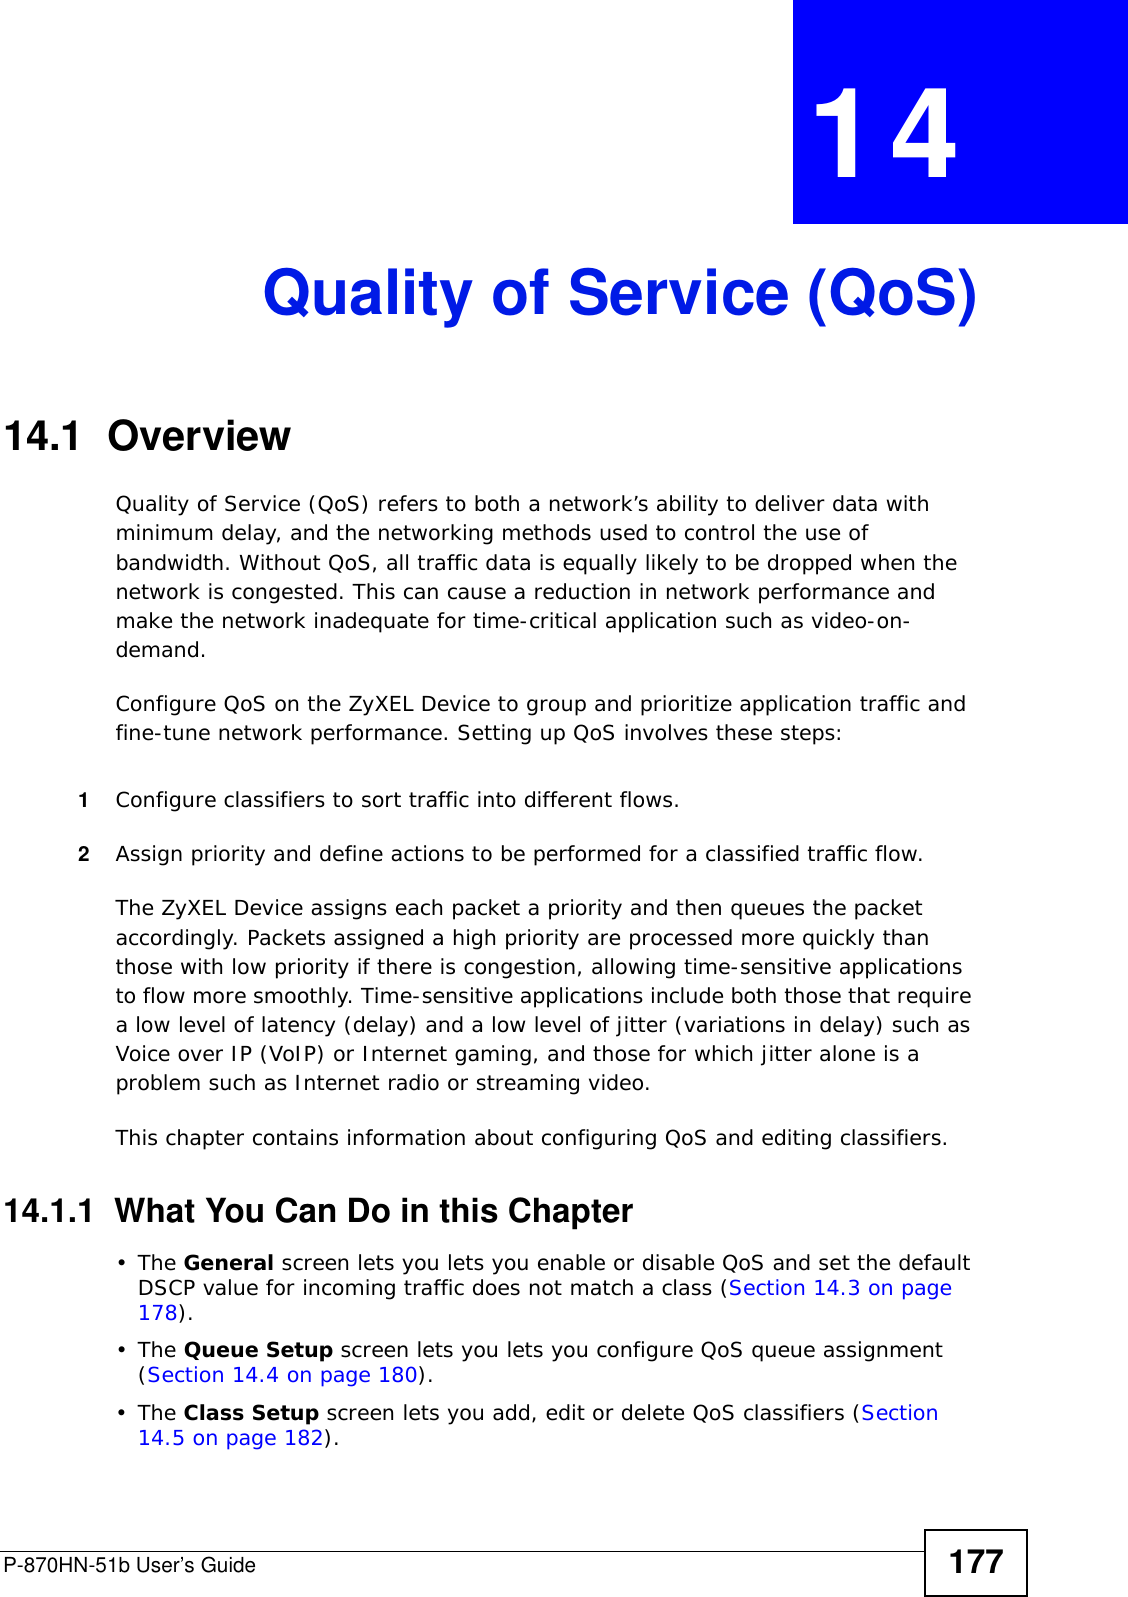 P-870HN-51b User’s Guide 177CHAPTER  14 Quality of Service (QoS)14.1  Overview Quality of Service (QoS) refers to both a network’s ability to deliver data with minimum delay, and the networking methods used to control the use of bandwidth. Without QoS, all traffic data is equally likely to be dropped when the network is congested. This can cause a reduction in network performance and make the network inadequate for time-critical application such as video-on-demand.Configure QoS on the ZyXEL Device to group and prioritize application traffic and fine-tune network performance. Setting up QoS involves these steps:1Configure classifiers to sort traffic into different flows. 2Assign priority and define actions to be performed for a classified traffic flow. The ZyXEL Device assigns each packet a priority and then queues the packet accordingly. Packets assigned a high priority are processed more quickly than those with low priority if there is congestion, allowing time-sensitive applications to flow more smoothly. Time-sensitive applications include both those that require a low level of latency (delay) and a low level of jitter (variations in delay) such as Voice over IP (VoIP) or Internet gaming, and those for which jitter alone is a problem such as Internet radio or streaming video.This chapter contains information about configuring QoS and editing classifiers.14.1.1  What You Can Do in this Chapter•The General screen lets you lets you enable or disable QoS and set the default DSCP value for incoming traffic does not match a class (Section 14.3 on page 178).•The Queue Setup screen lets you lets you configure QoS queue assignment (Section 14.4 on page 180).•The Class Setup screen lets you add, edit or delete QoS classifiers (Section 14.5 on page 182).